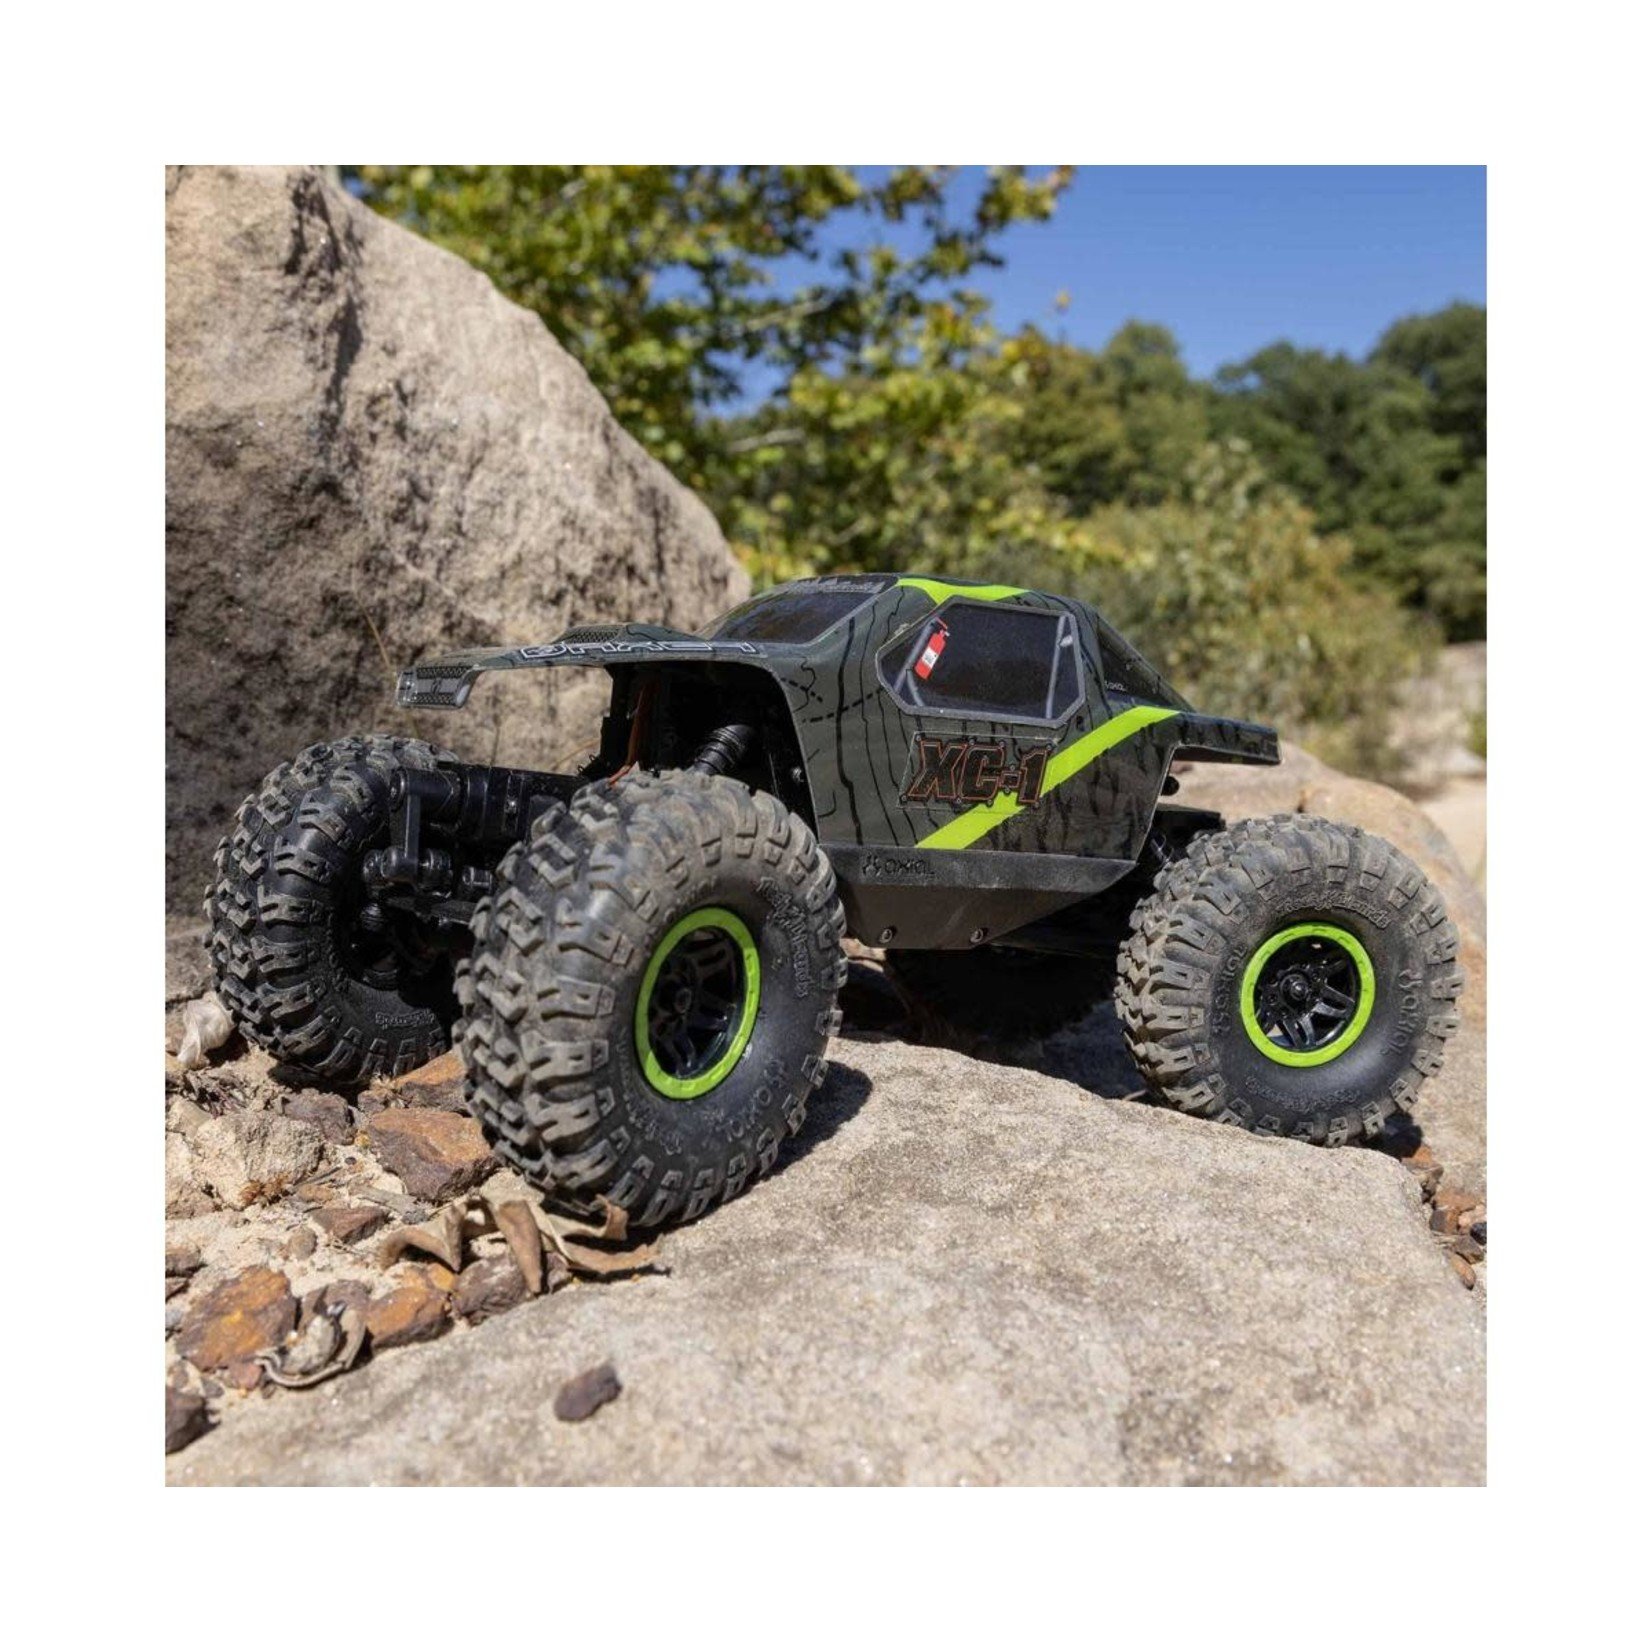 Axial Axial AX24 XC-1 1/24 4WD RTR 4WS Mini Crawler (Green) w/2.4GHz Radio, Battery & Charger #AXI00003T1